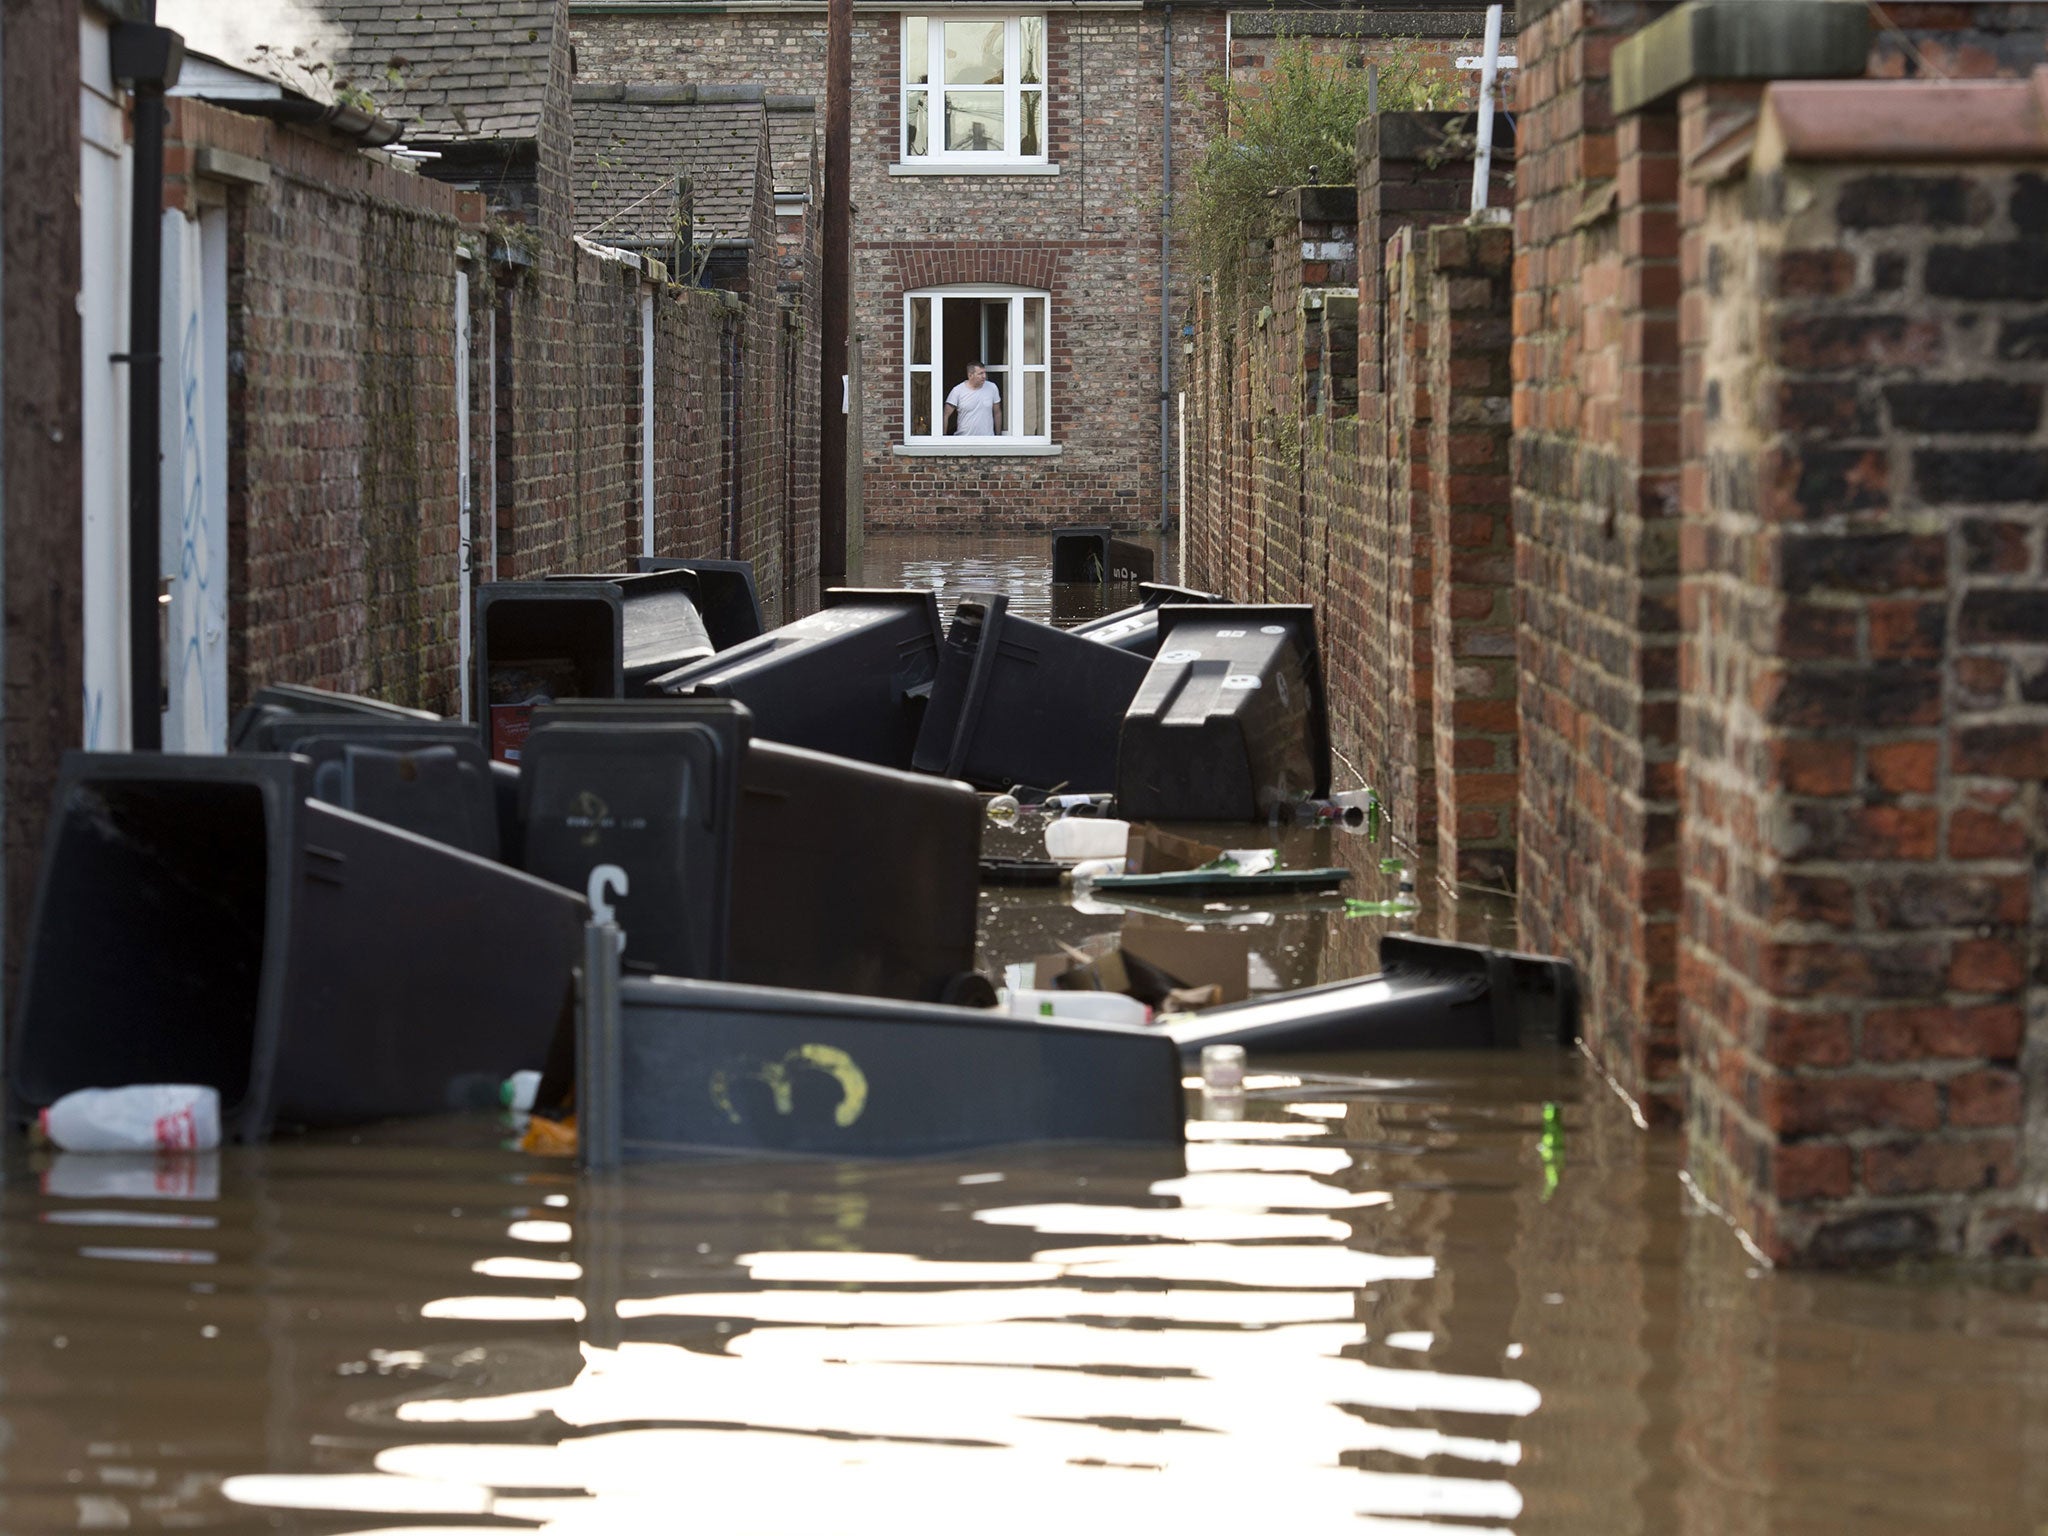 An alleyway filled with floating garbage bins after the adjacent River Ouse burst it's banks in York